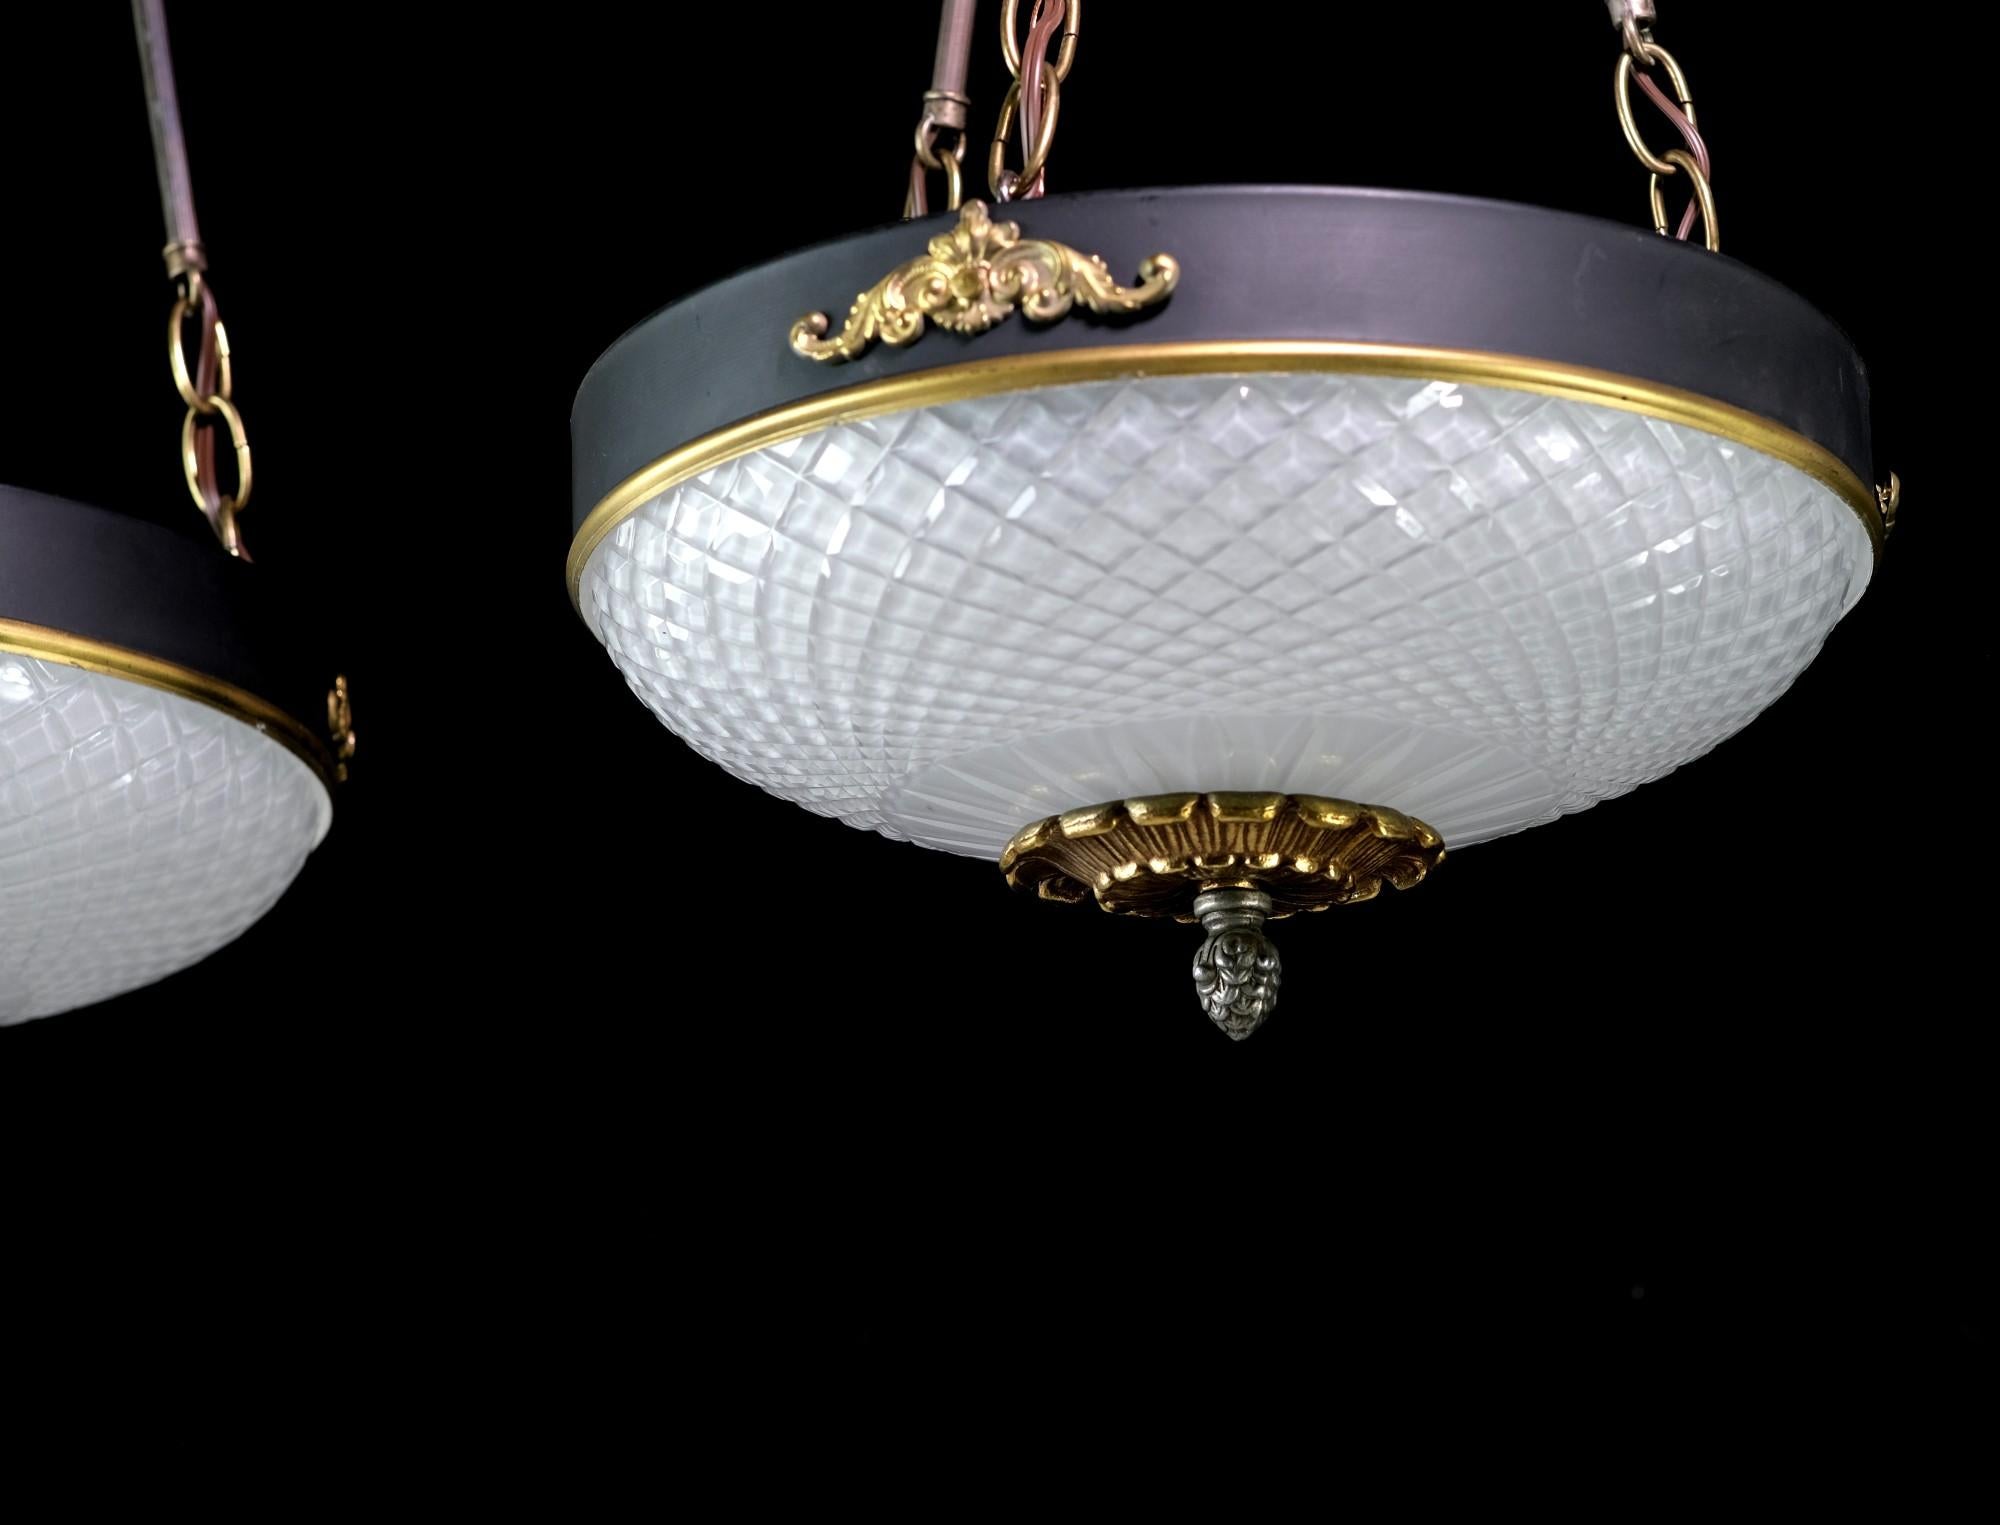 NYC Waldorf Astoria Etched Glass Empire Style Pendant Lights, Sold as Pair 1